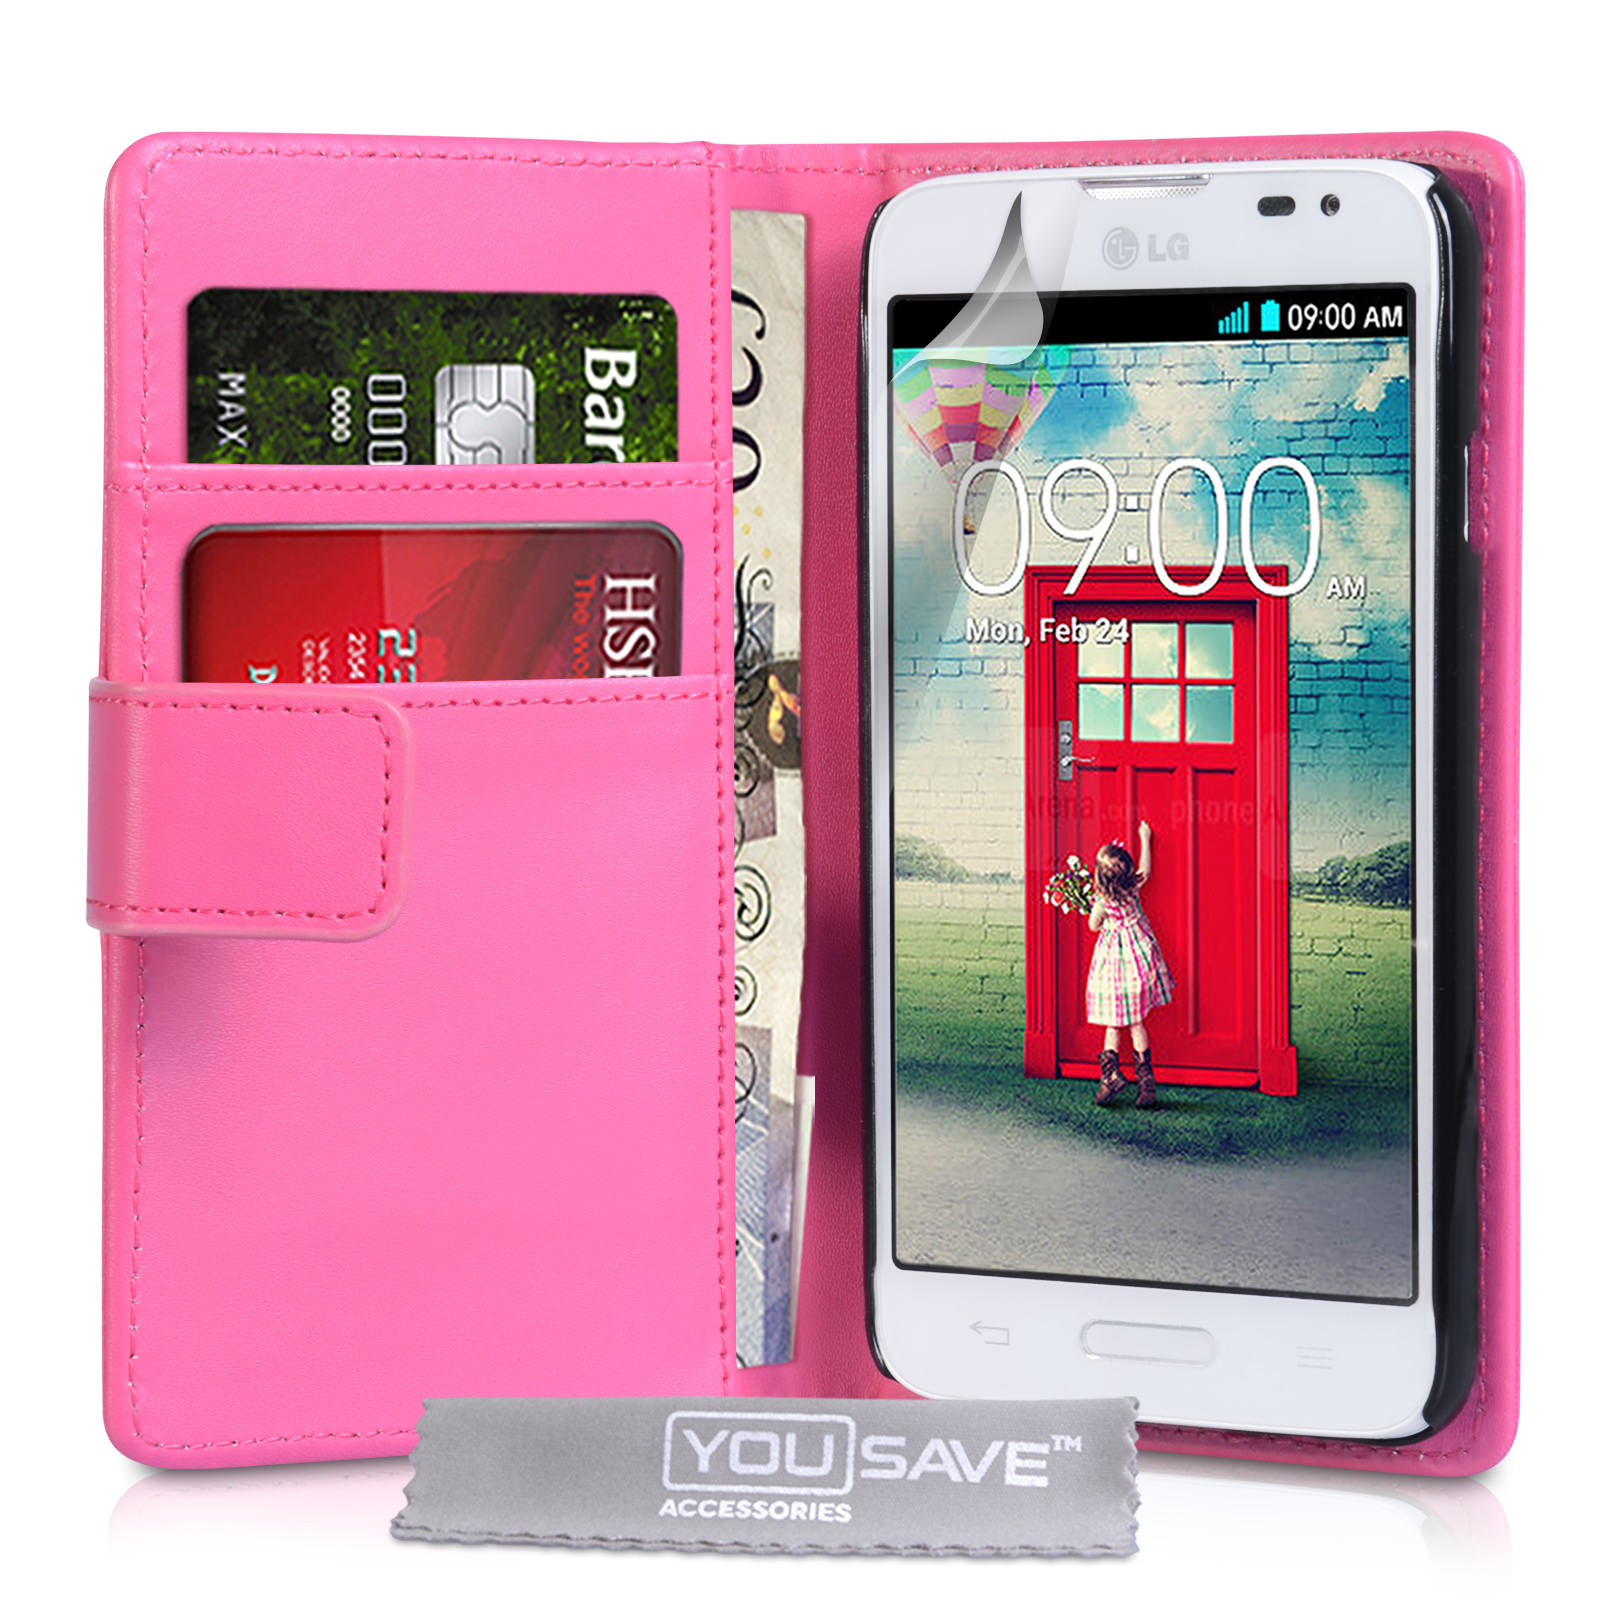 YouSave Accessories LG L70 Leather-Effect Wallet Case - Hot Pink